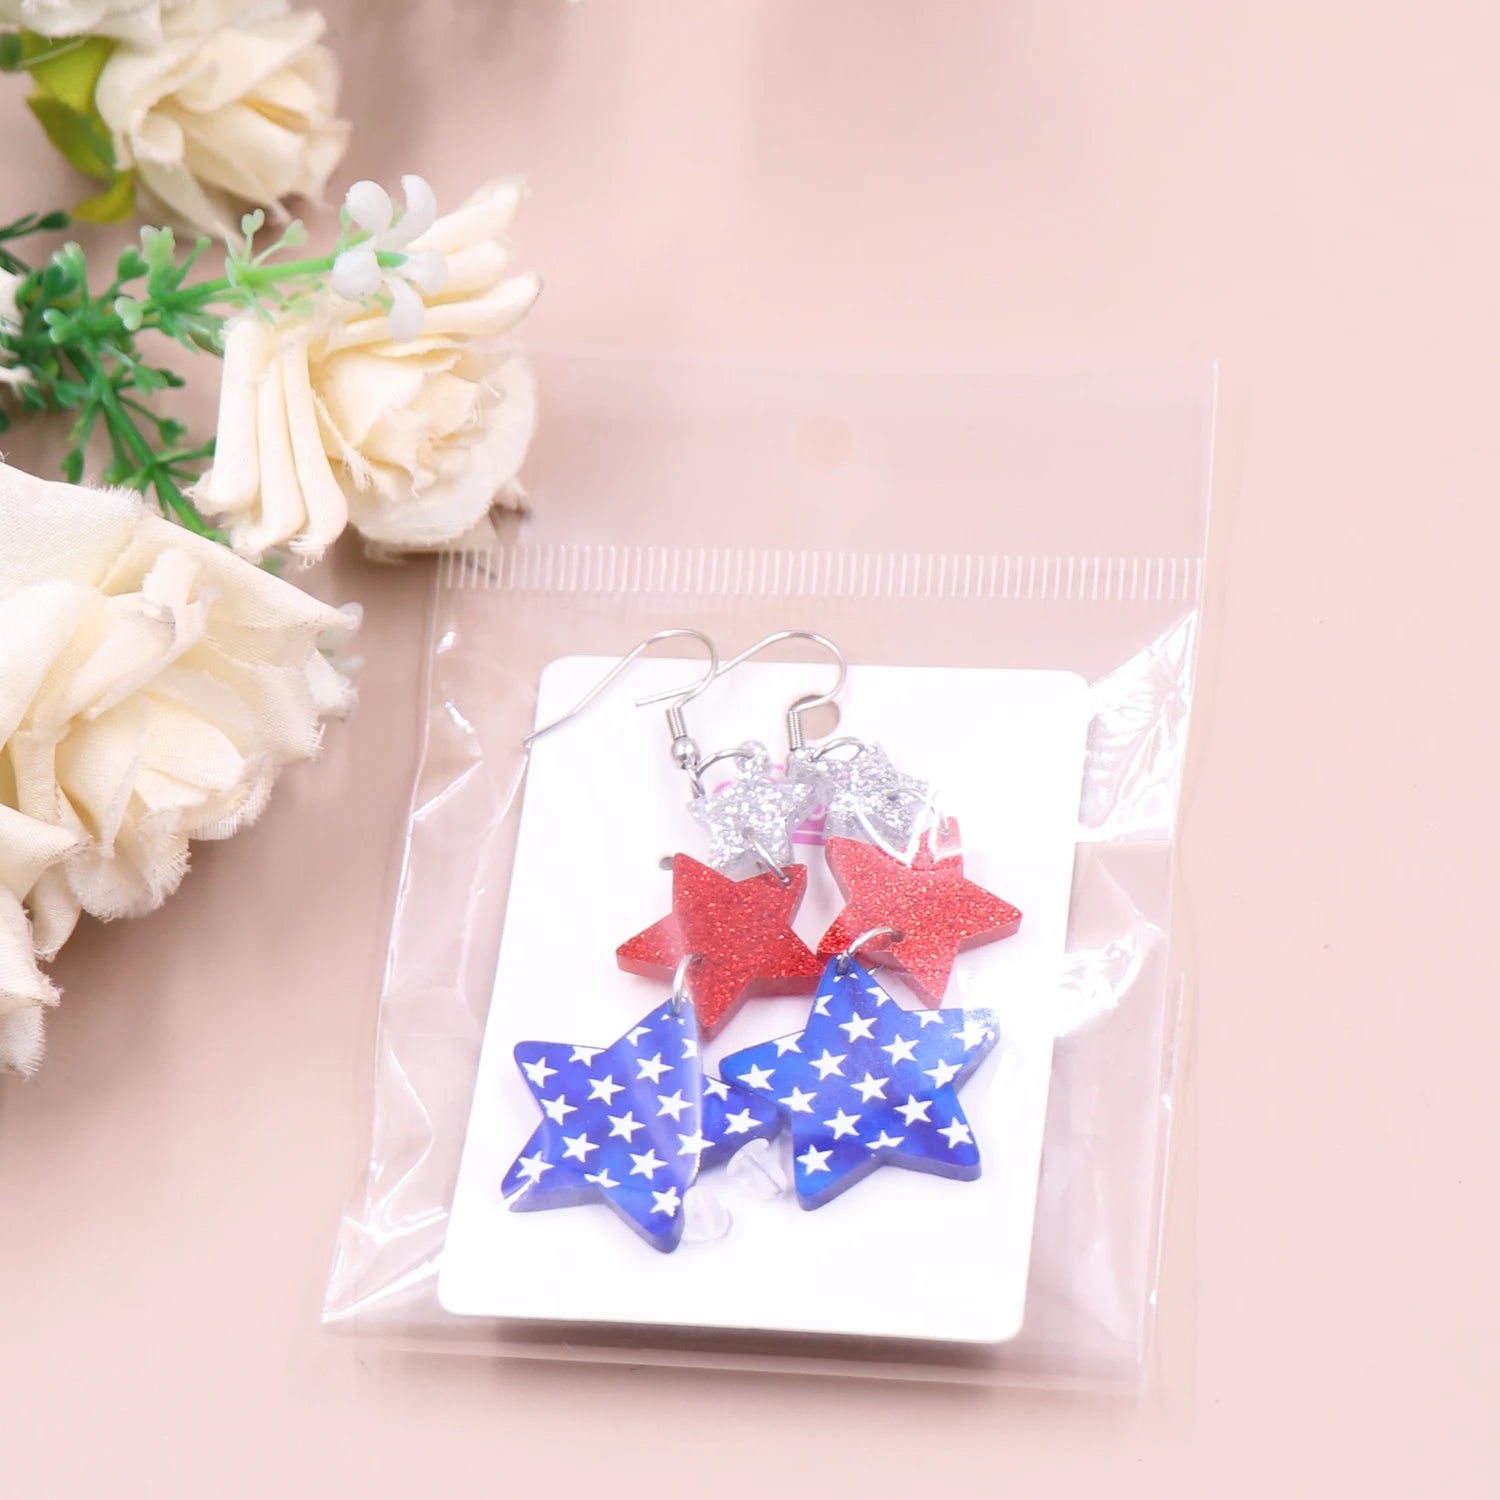 Double Star 4th of July Independence Day US Flag Earrings